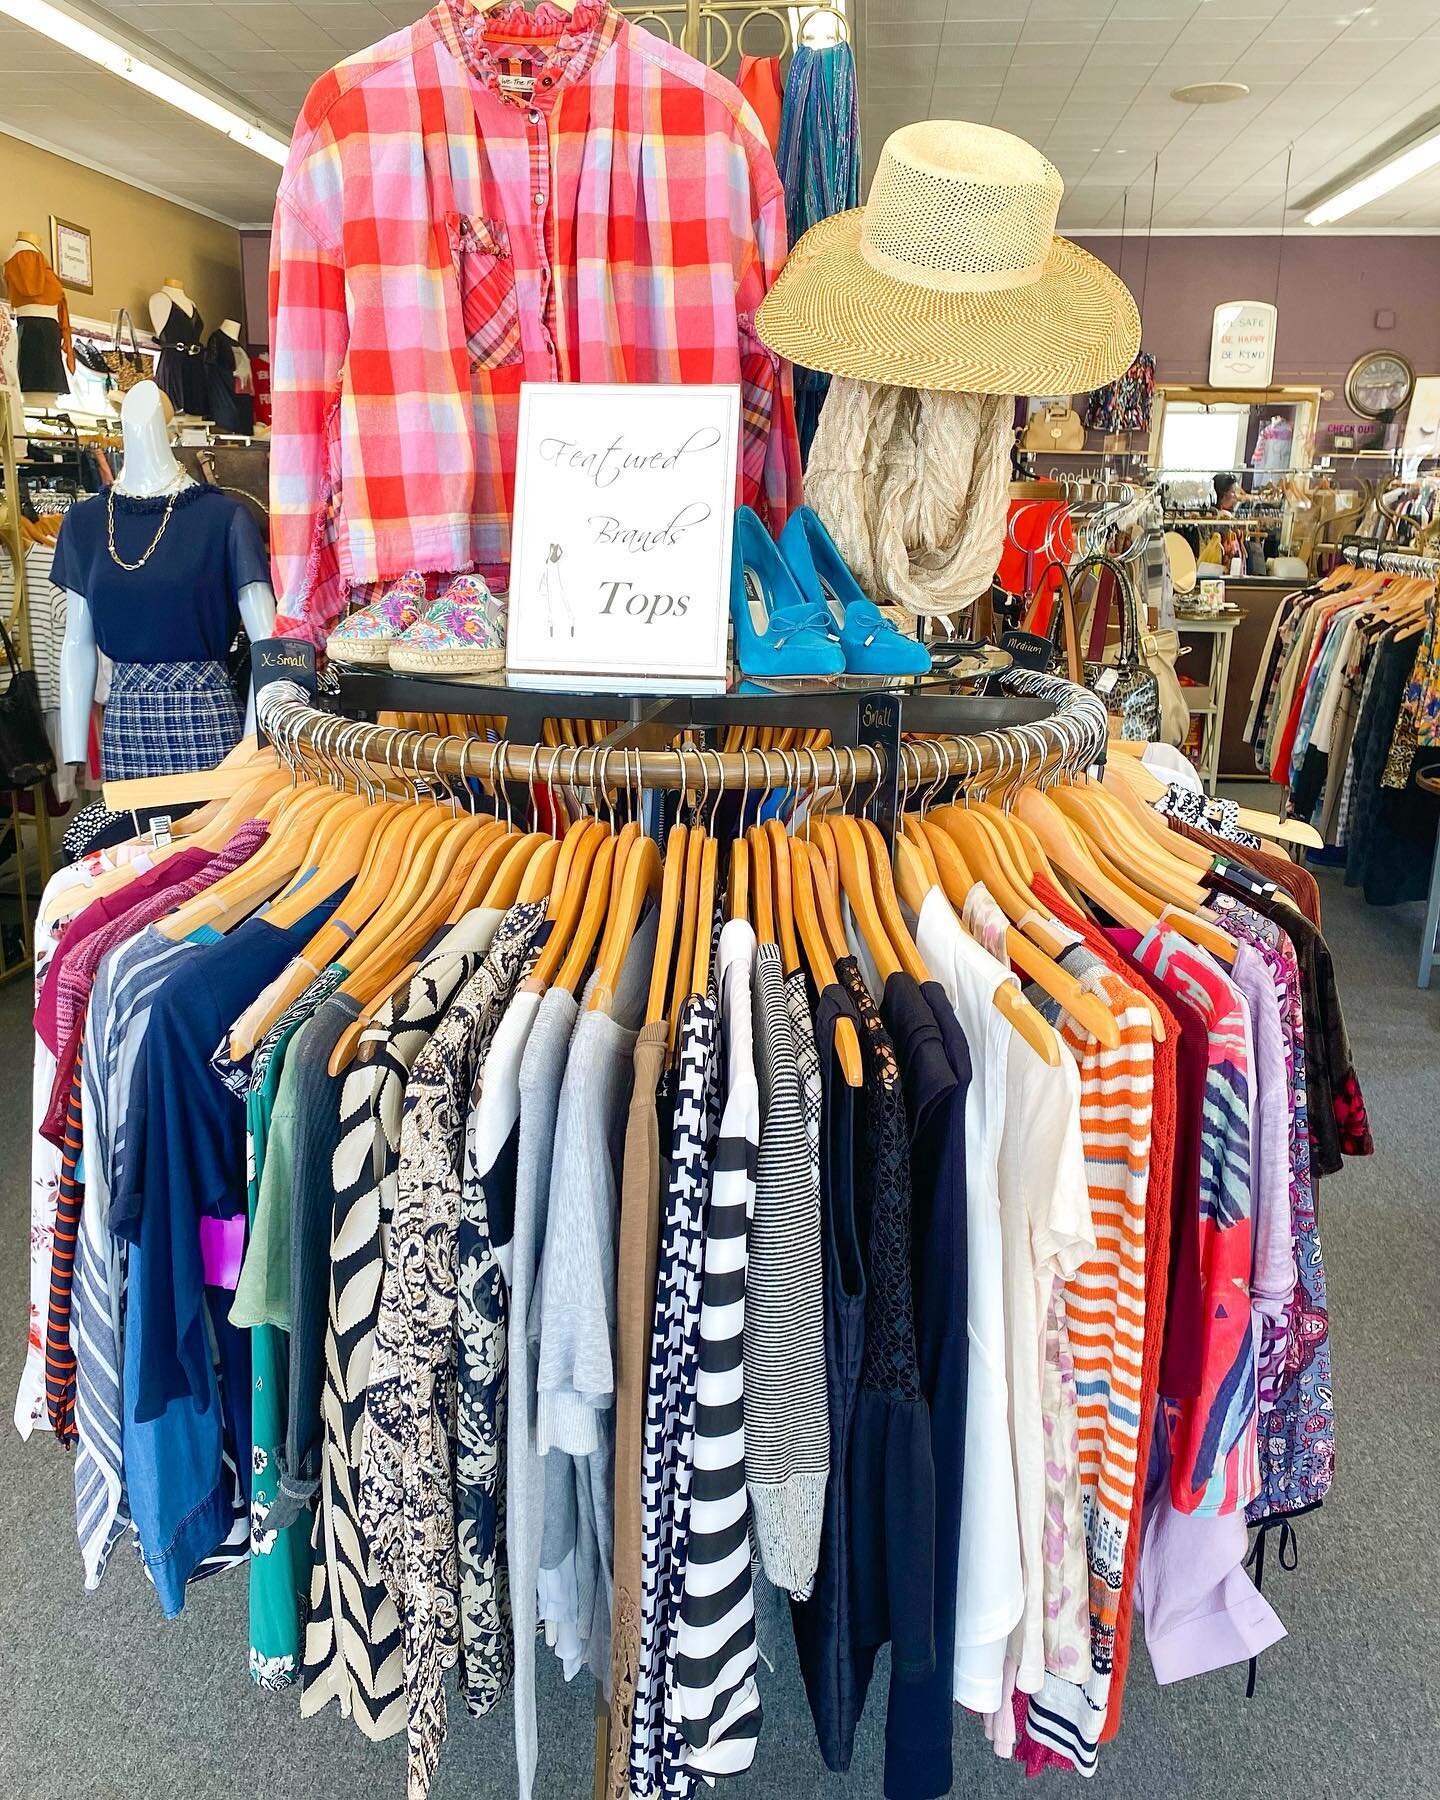 Every Thursday open until 7pm! 🛍#shopwithus ⬇️
[Updated $5 rack in the back room]